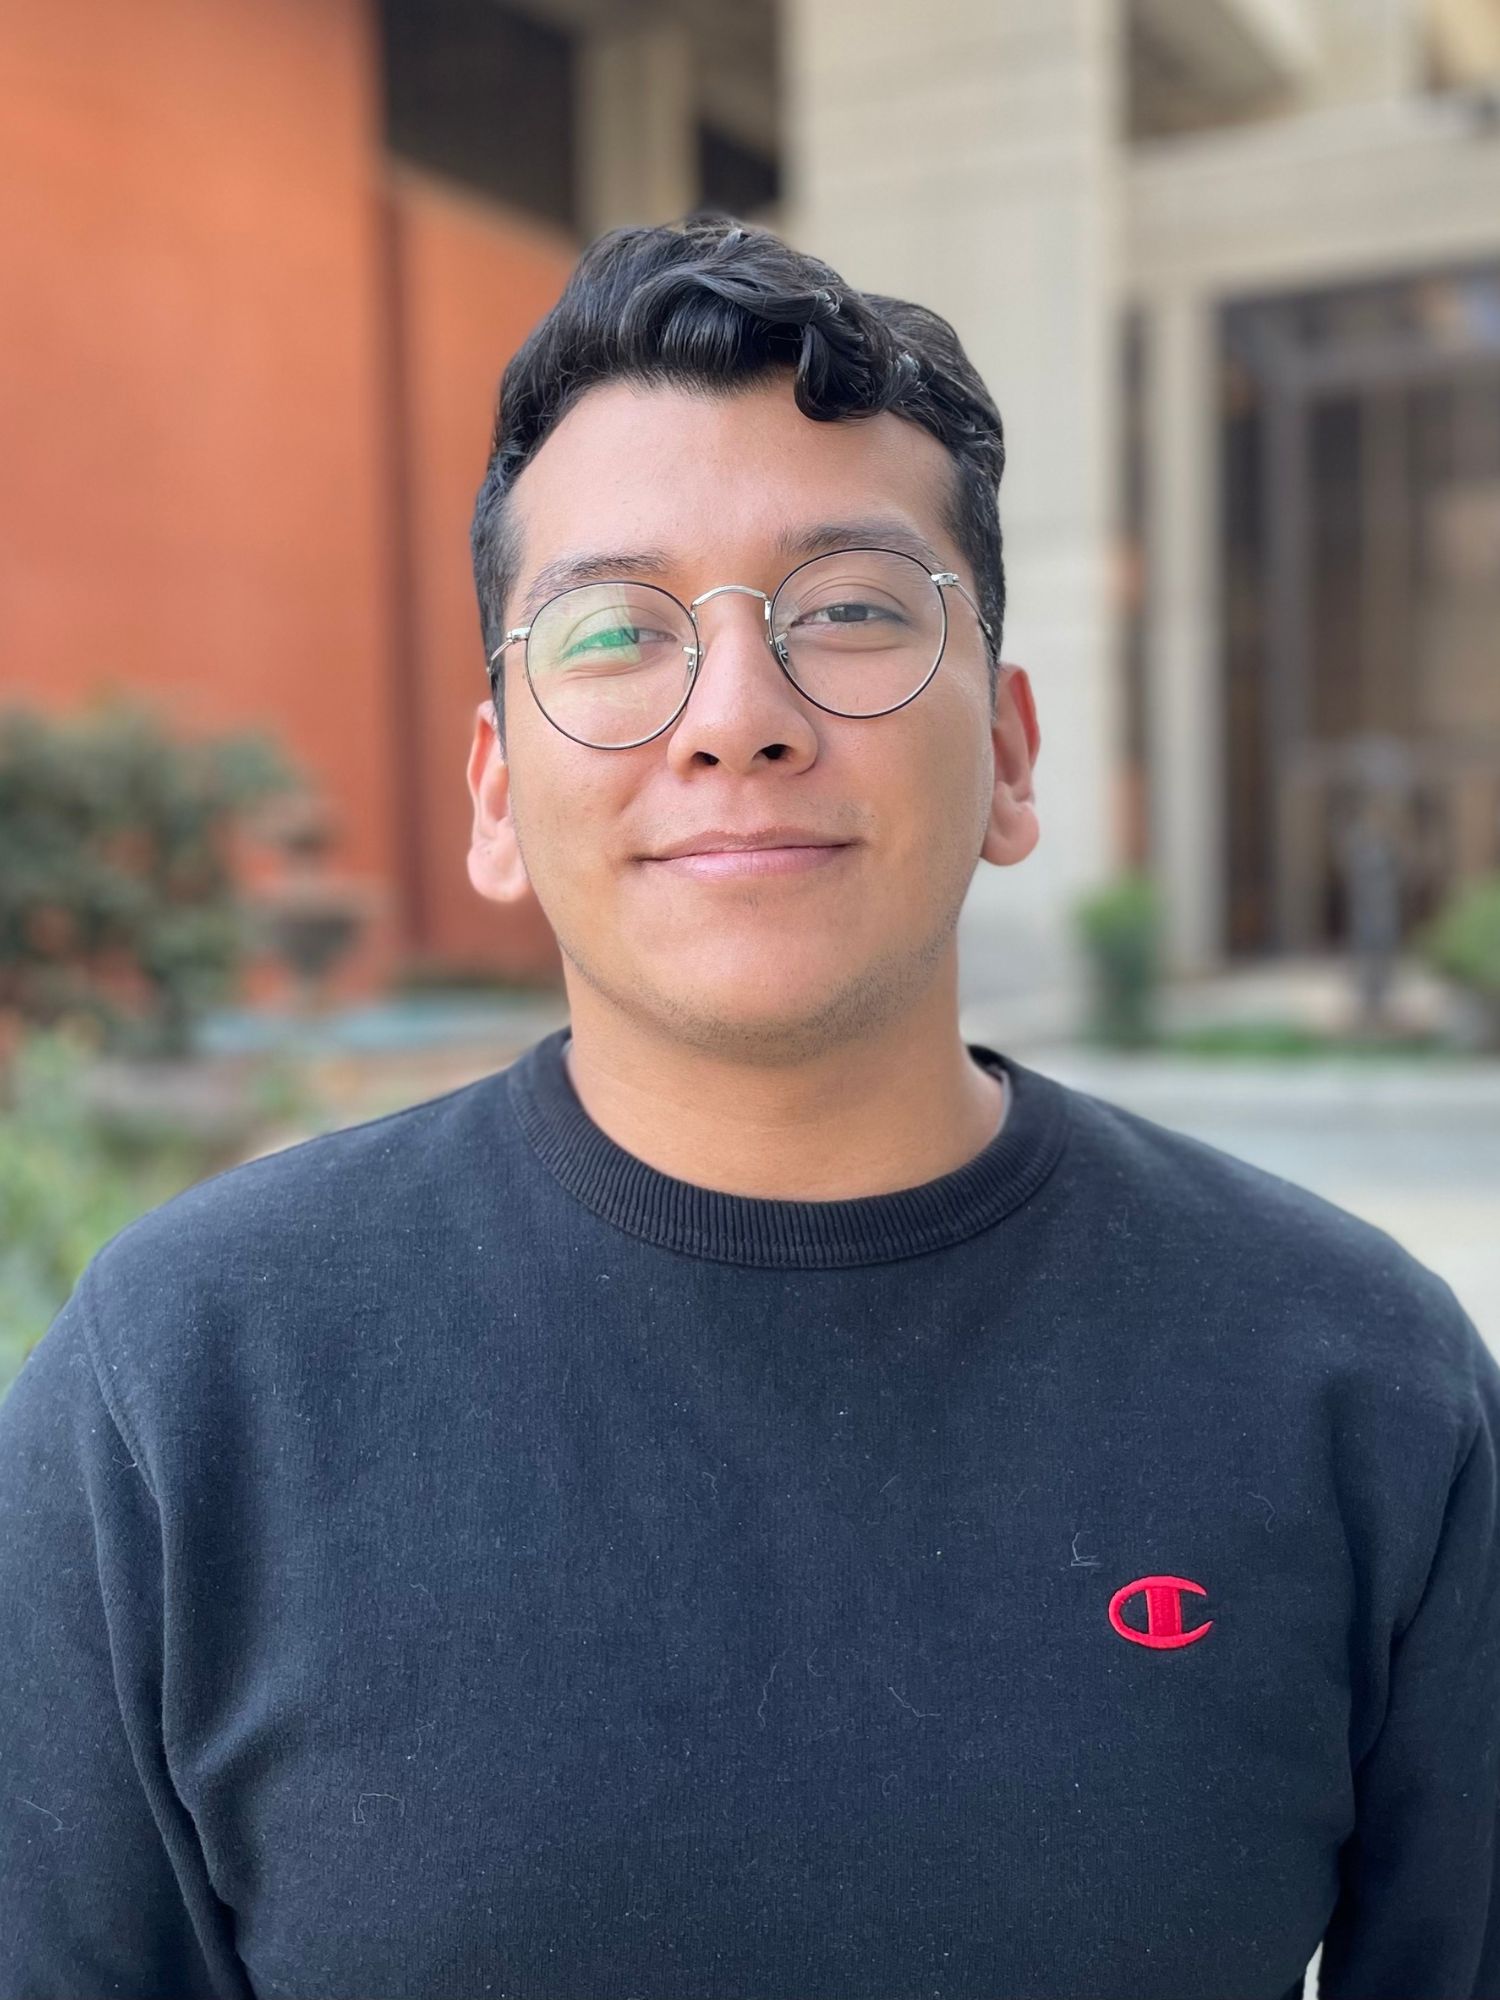 Marcos Rosas wearing a dark colored sweater outside Fresno State's Library